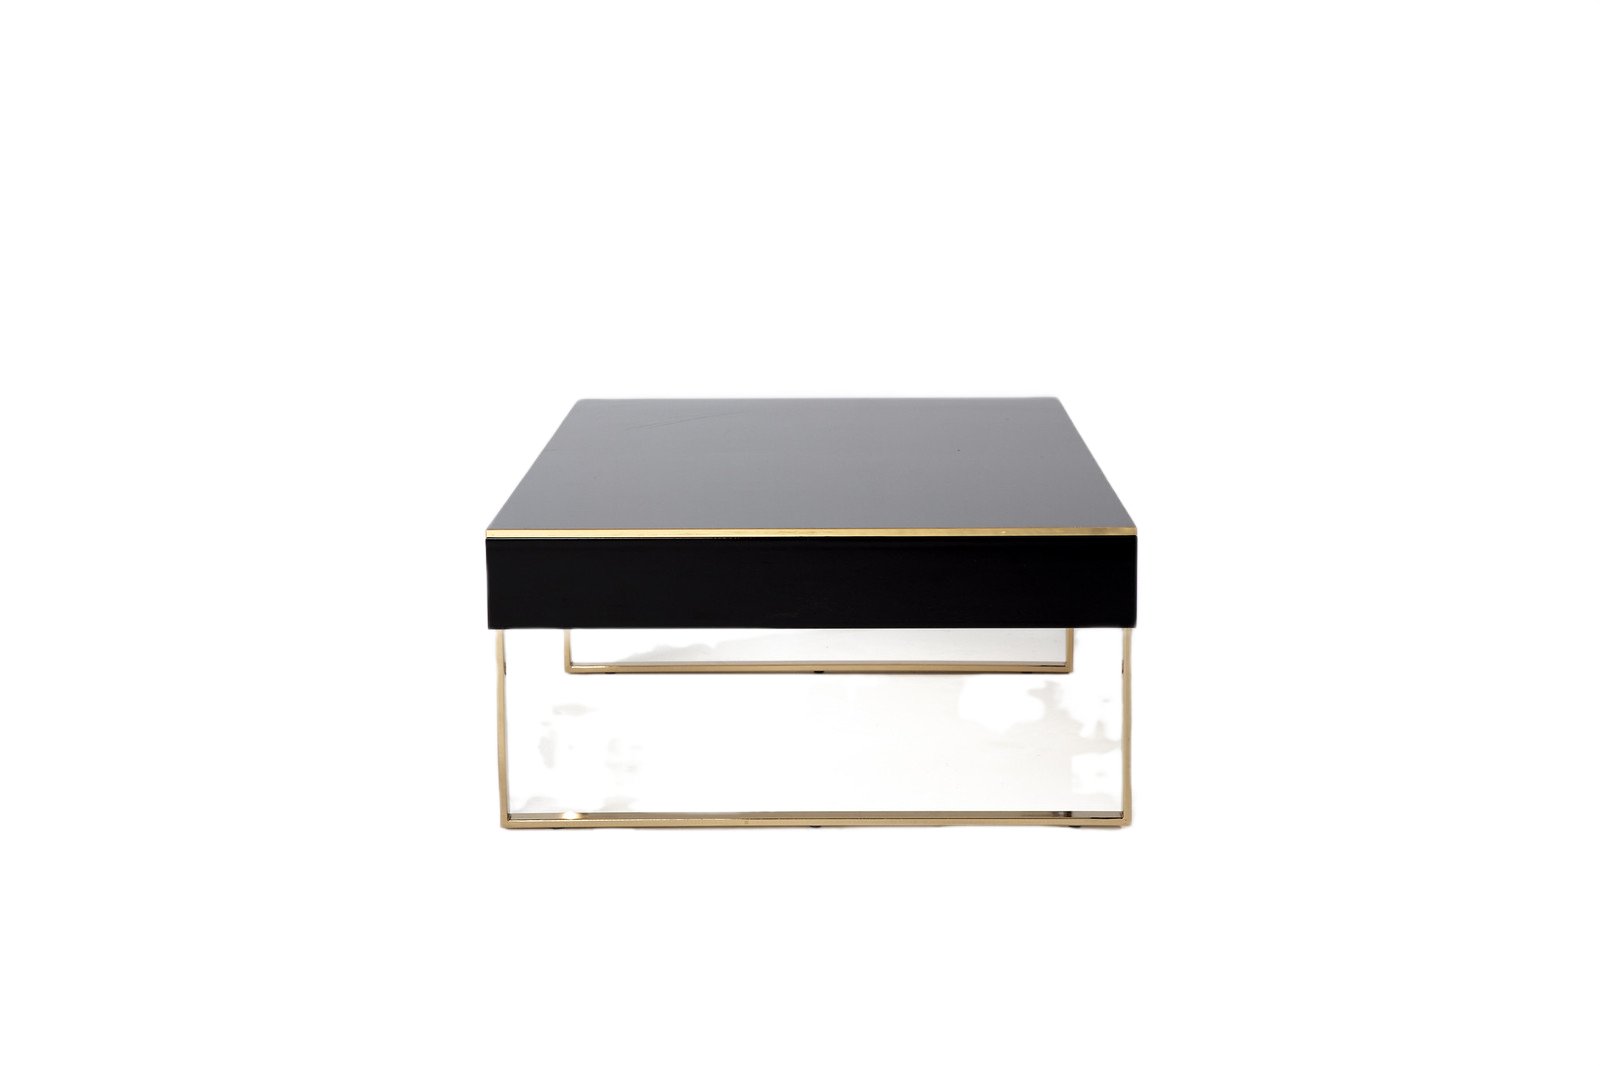 Carlino Coffee Table by Bellona